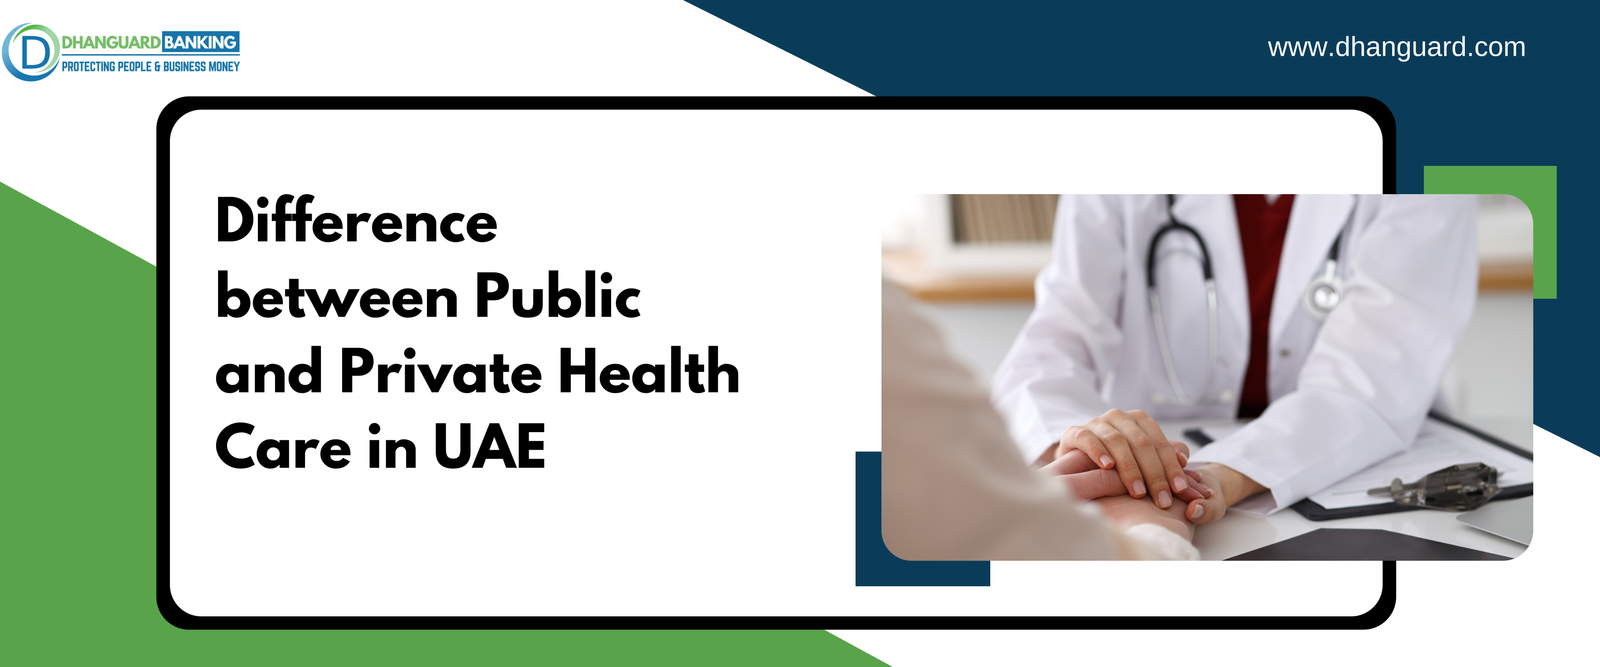 Difference between Public and Private Health care in UAE